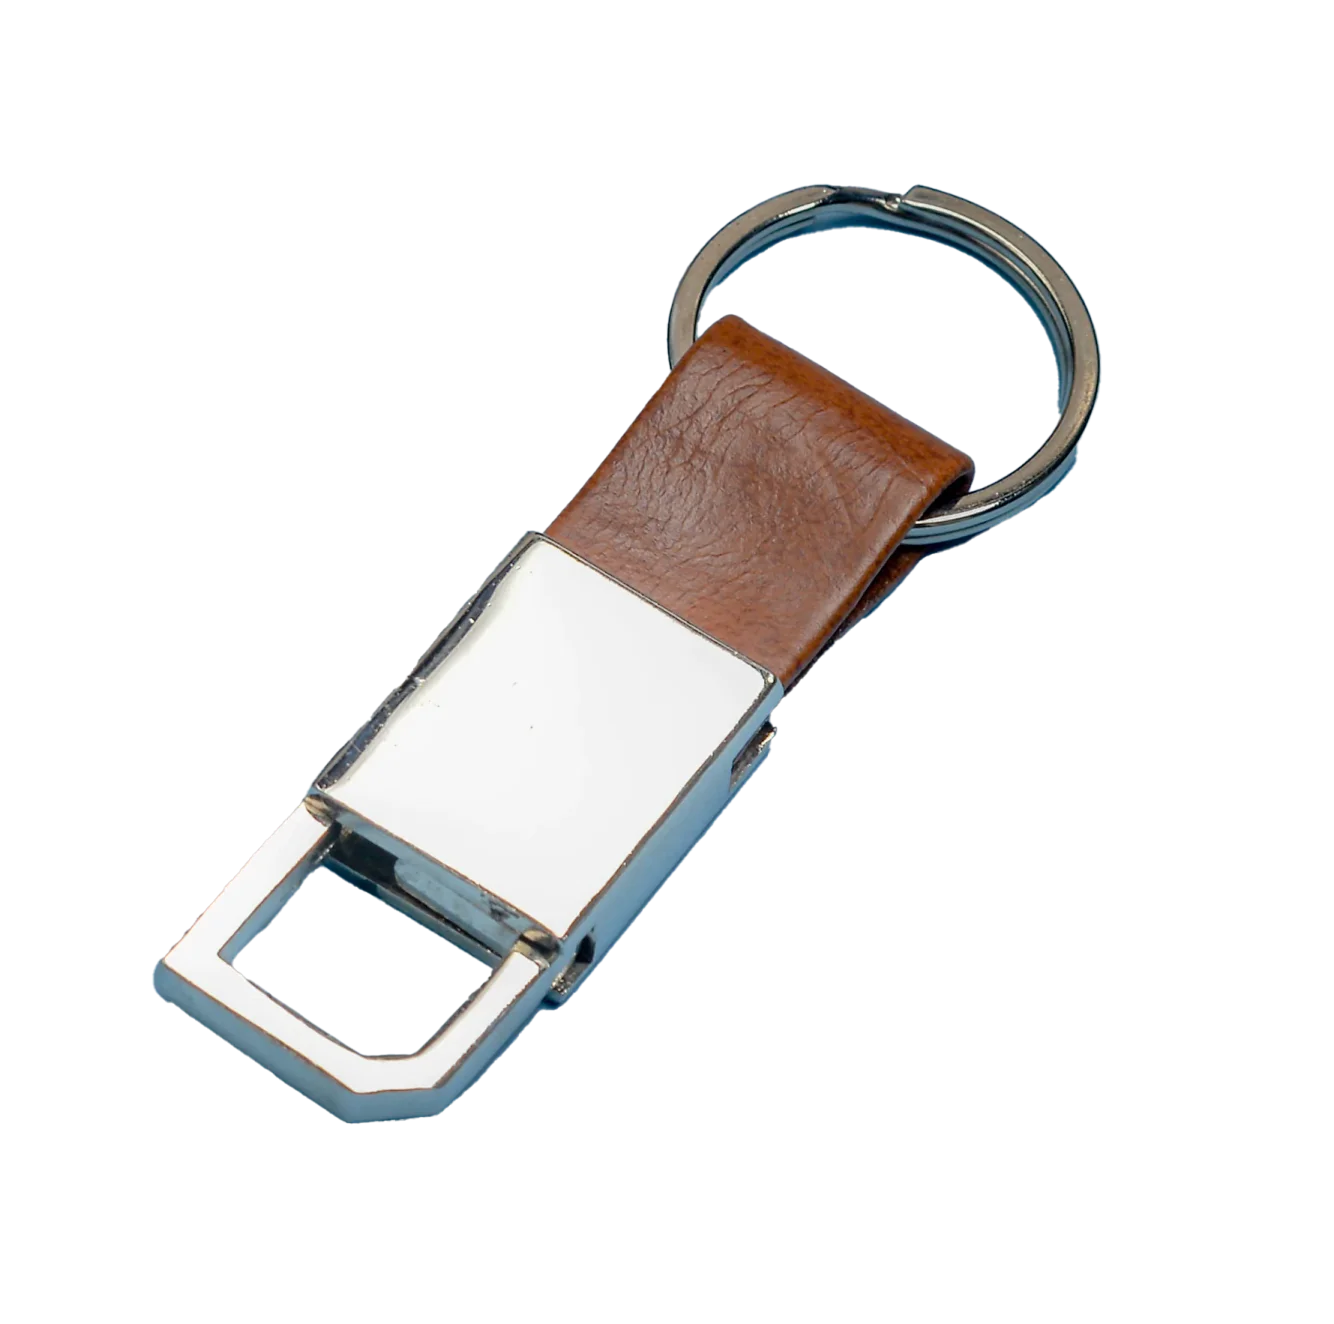 "With a sturdy key ring and secure clasp, you can rest assured that your keys will always be within reach with this personalised metal keychain. Avoid confusion with the help of these creative keychains."